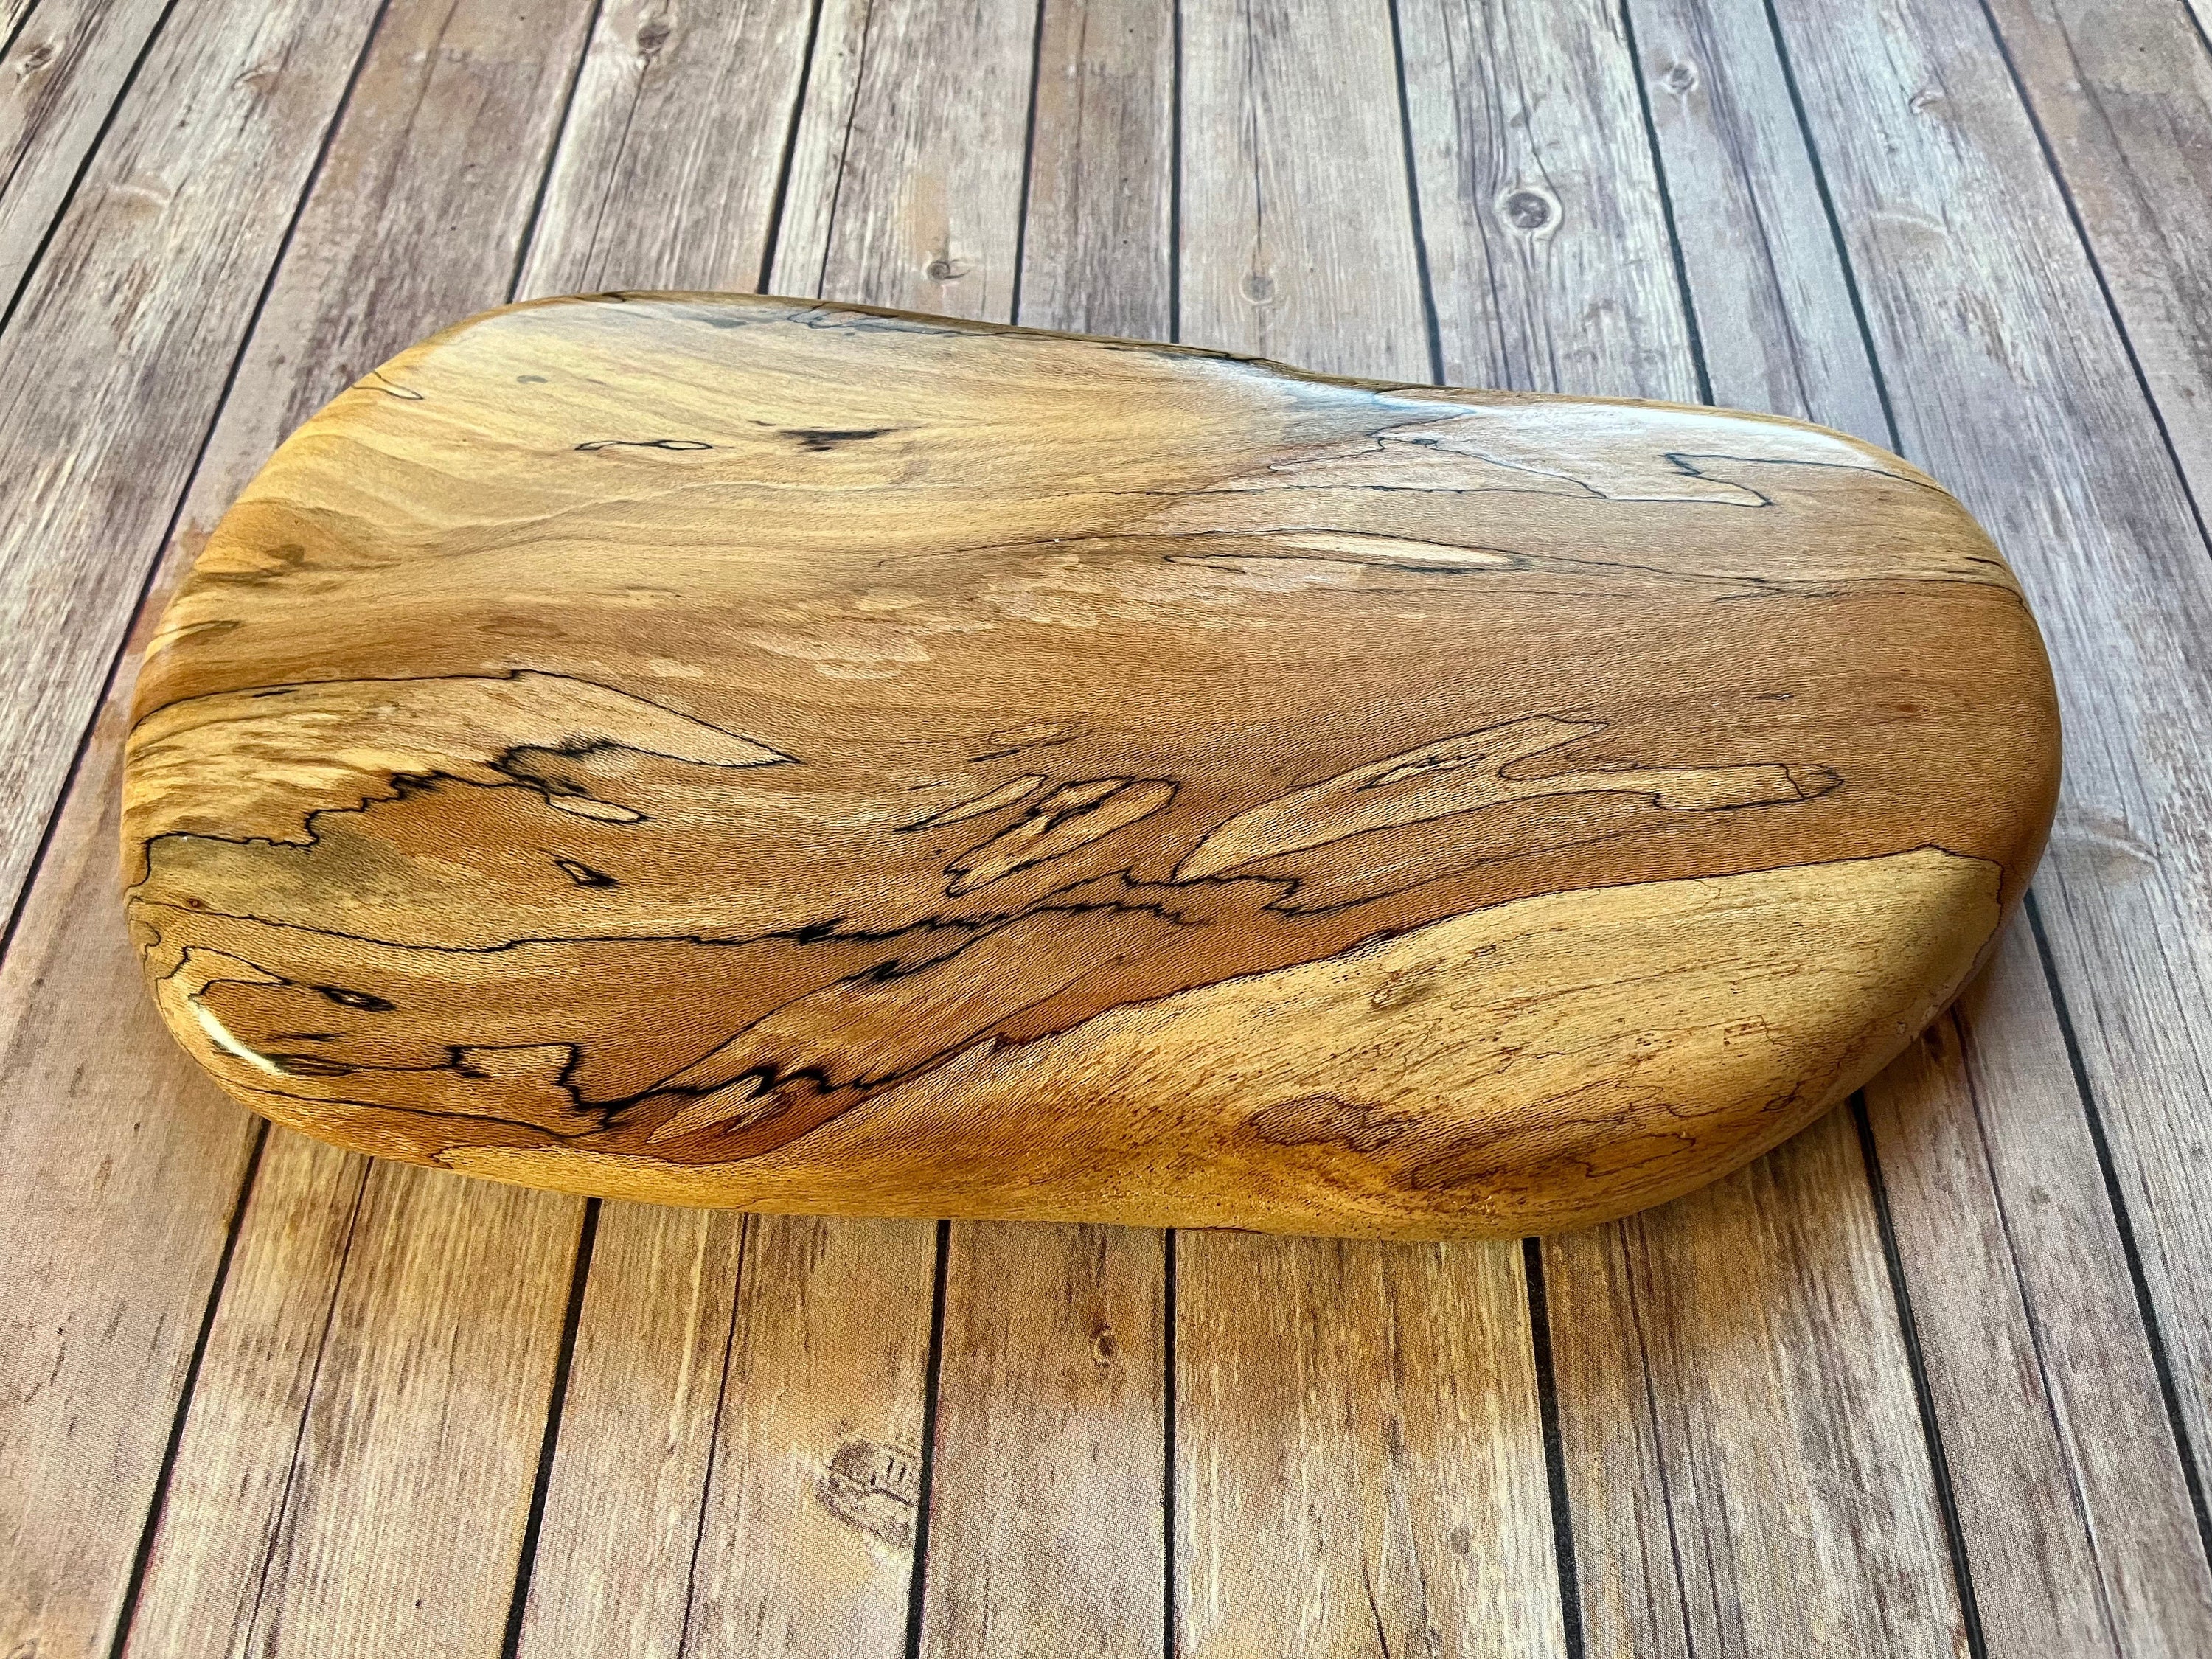 Round Olive Wood Cue Ball Cutting Board – Little Ledge Woodworks